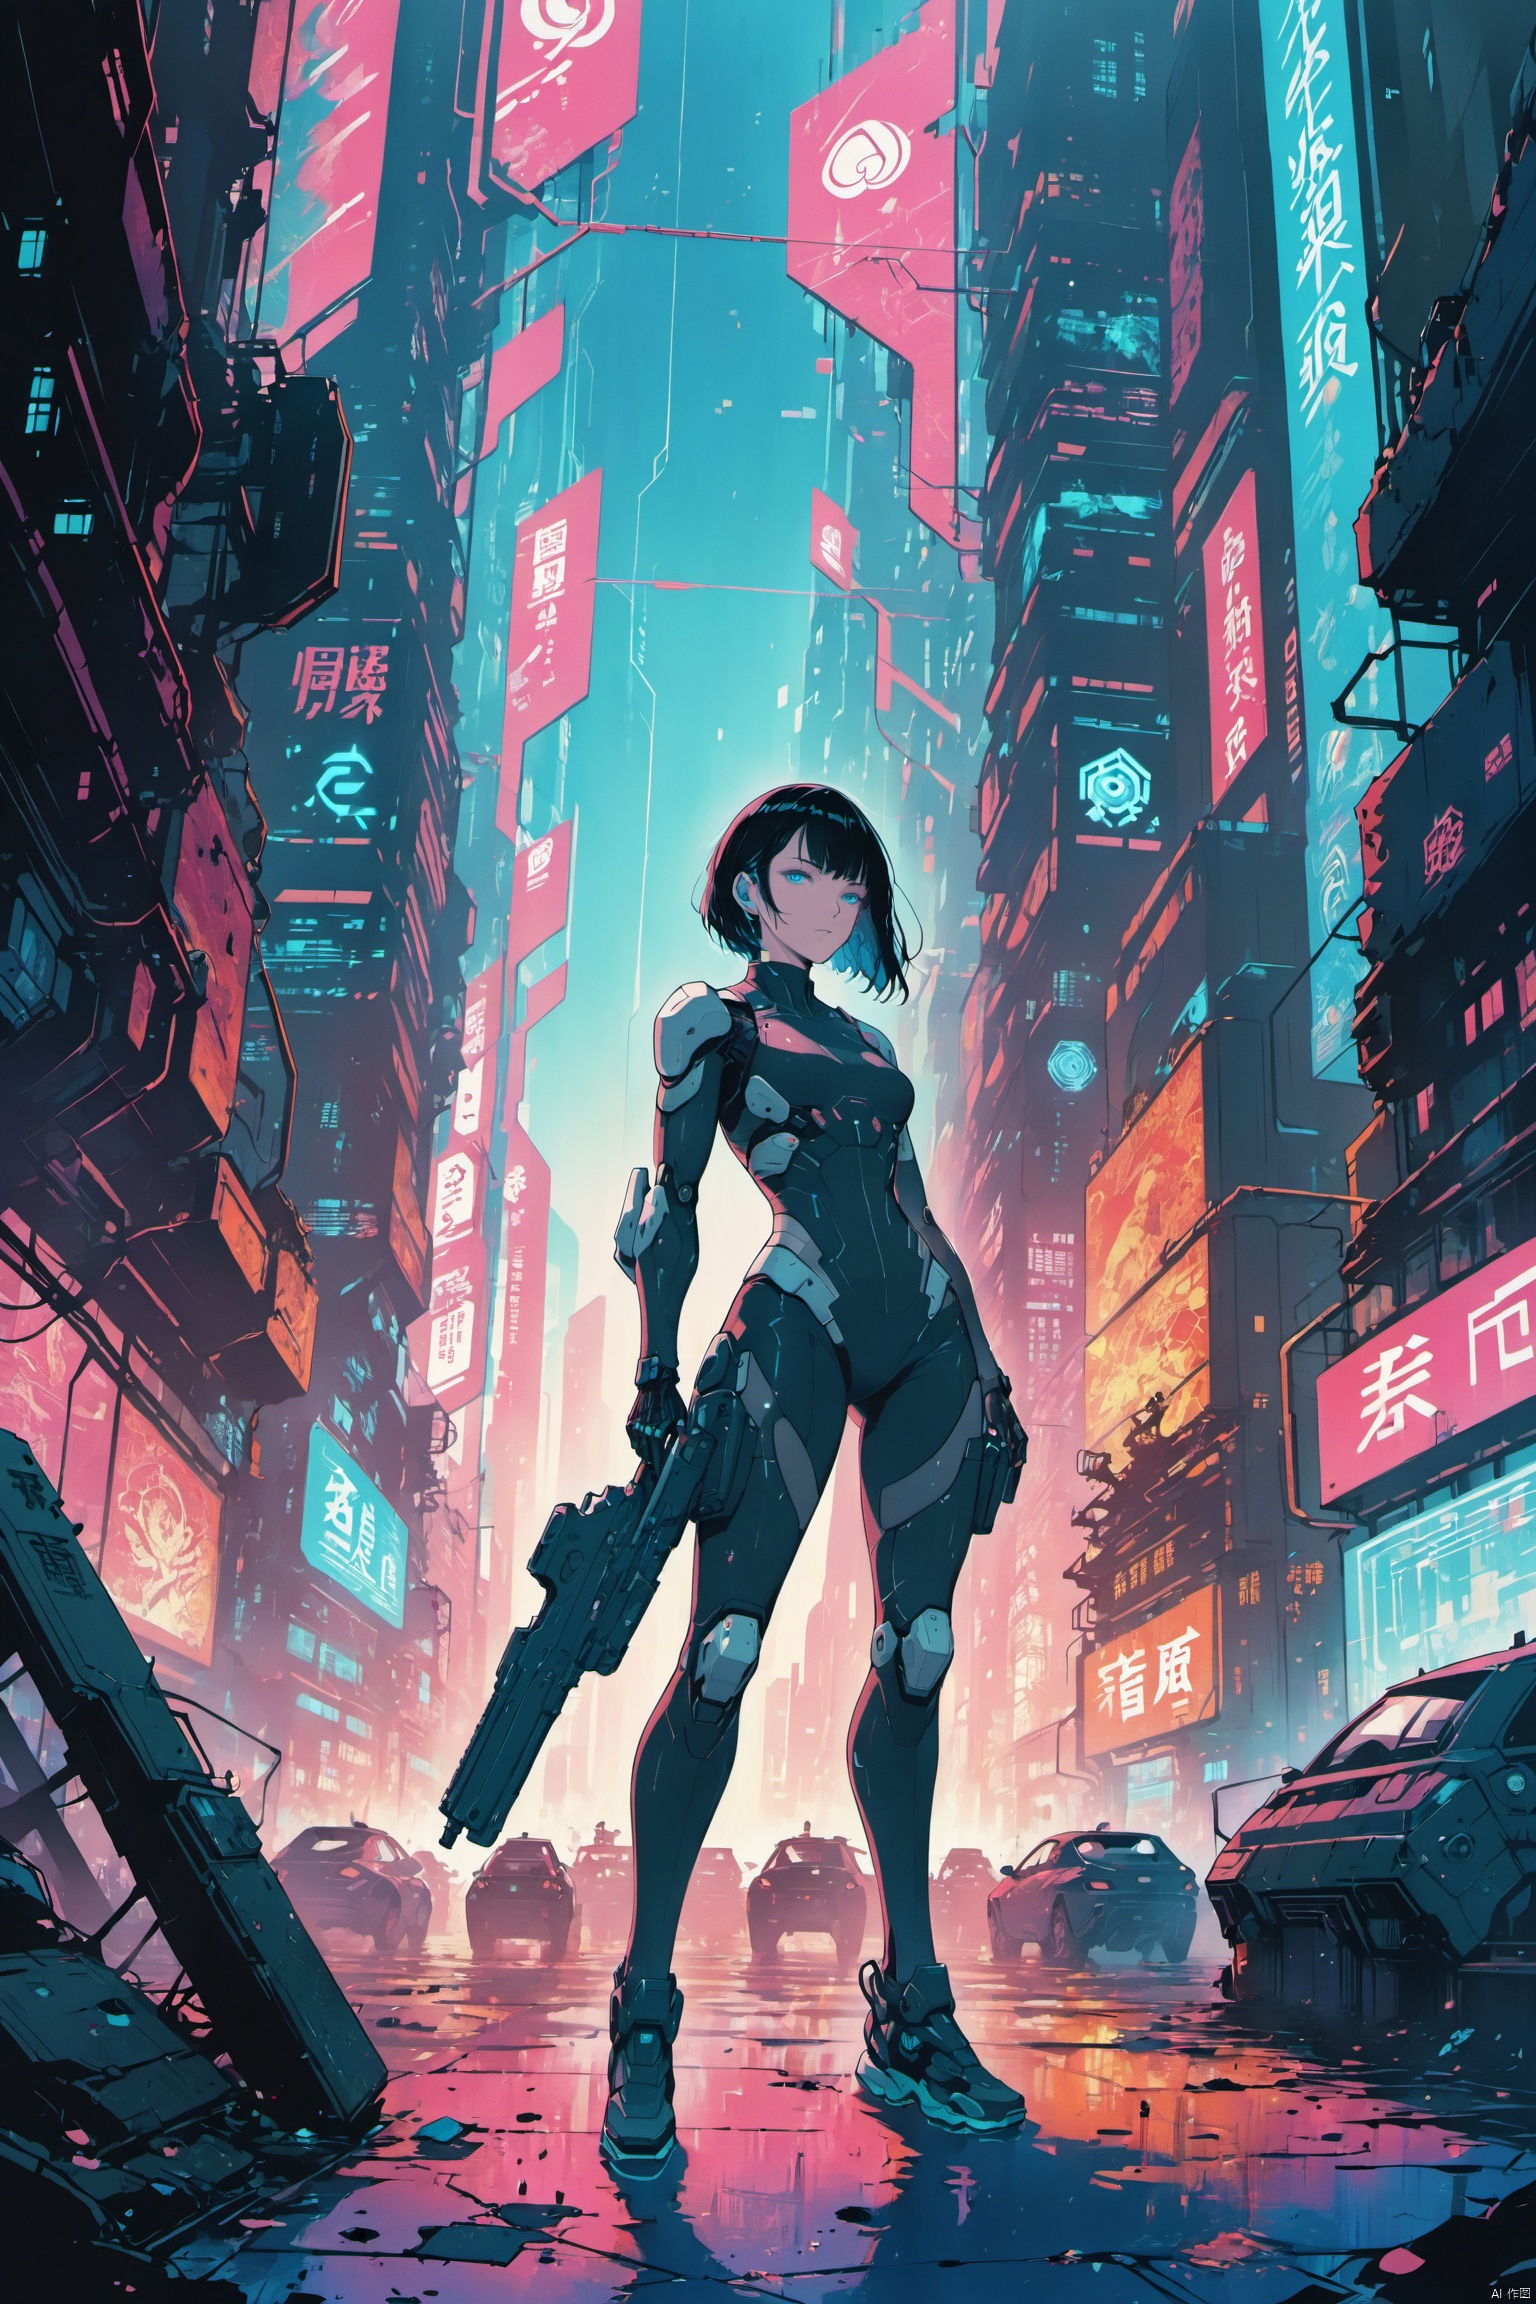 1character inspired by Ghost in the Shell, full-body illustration, female cyborg protagonist with a slender yet athletic build, wearing a form-fitting tactical jumpsuit that blends seamlessly with her synthetic body parts, visually striking prosthetic limbs featuring advanced articulation and built-in weaponry, partial see-through polymer skin revealing complex circuitry and subdermal implants, augmented reality display projected across her field of vision, stand-offish demeanor and piercing gaze, signature firearm holstered at her side, surrounded by the neon-drenched alleys of a sprawling cyberpunk metropolis, her existence questioning the boundaries of humanity in an era dominated by artificial intelligence and cybernetic enhancements.,((anime art style)), ((poakl)), eastern mythology